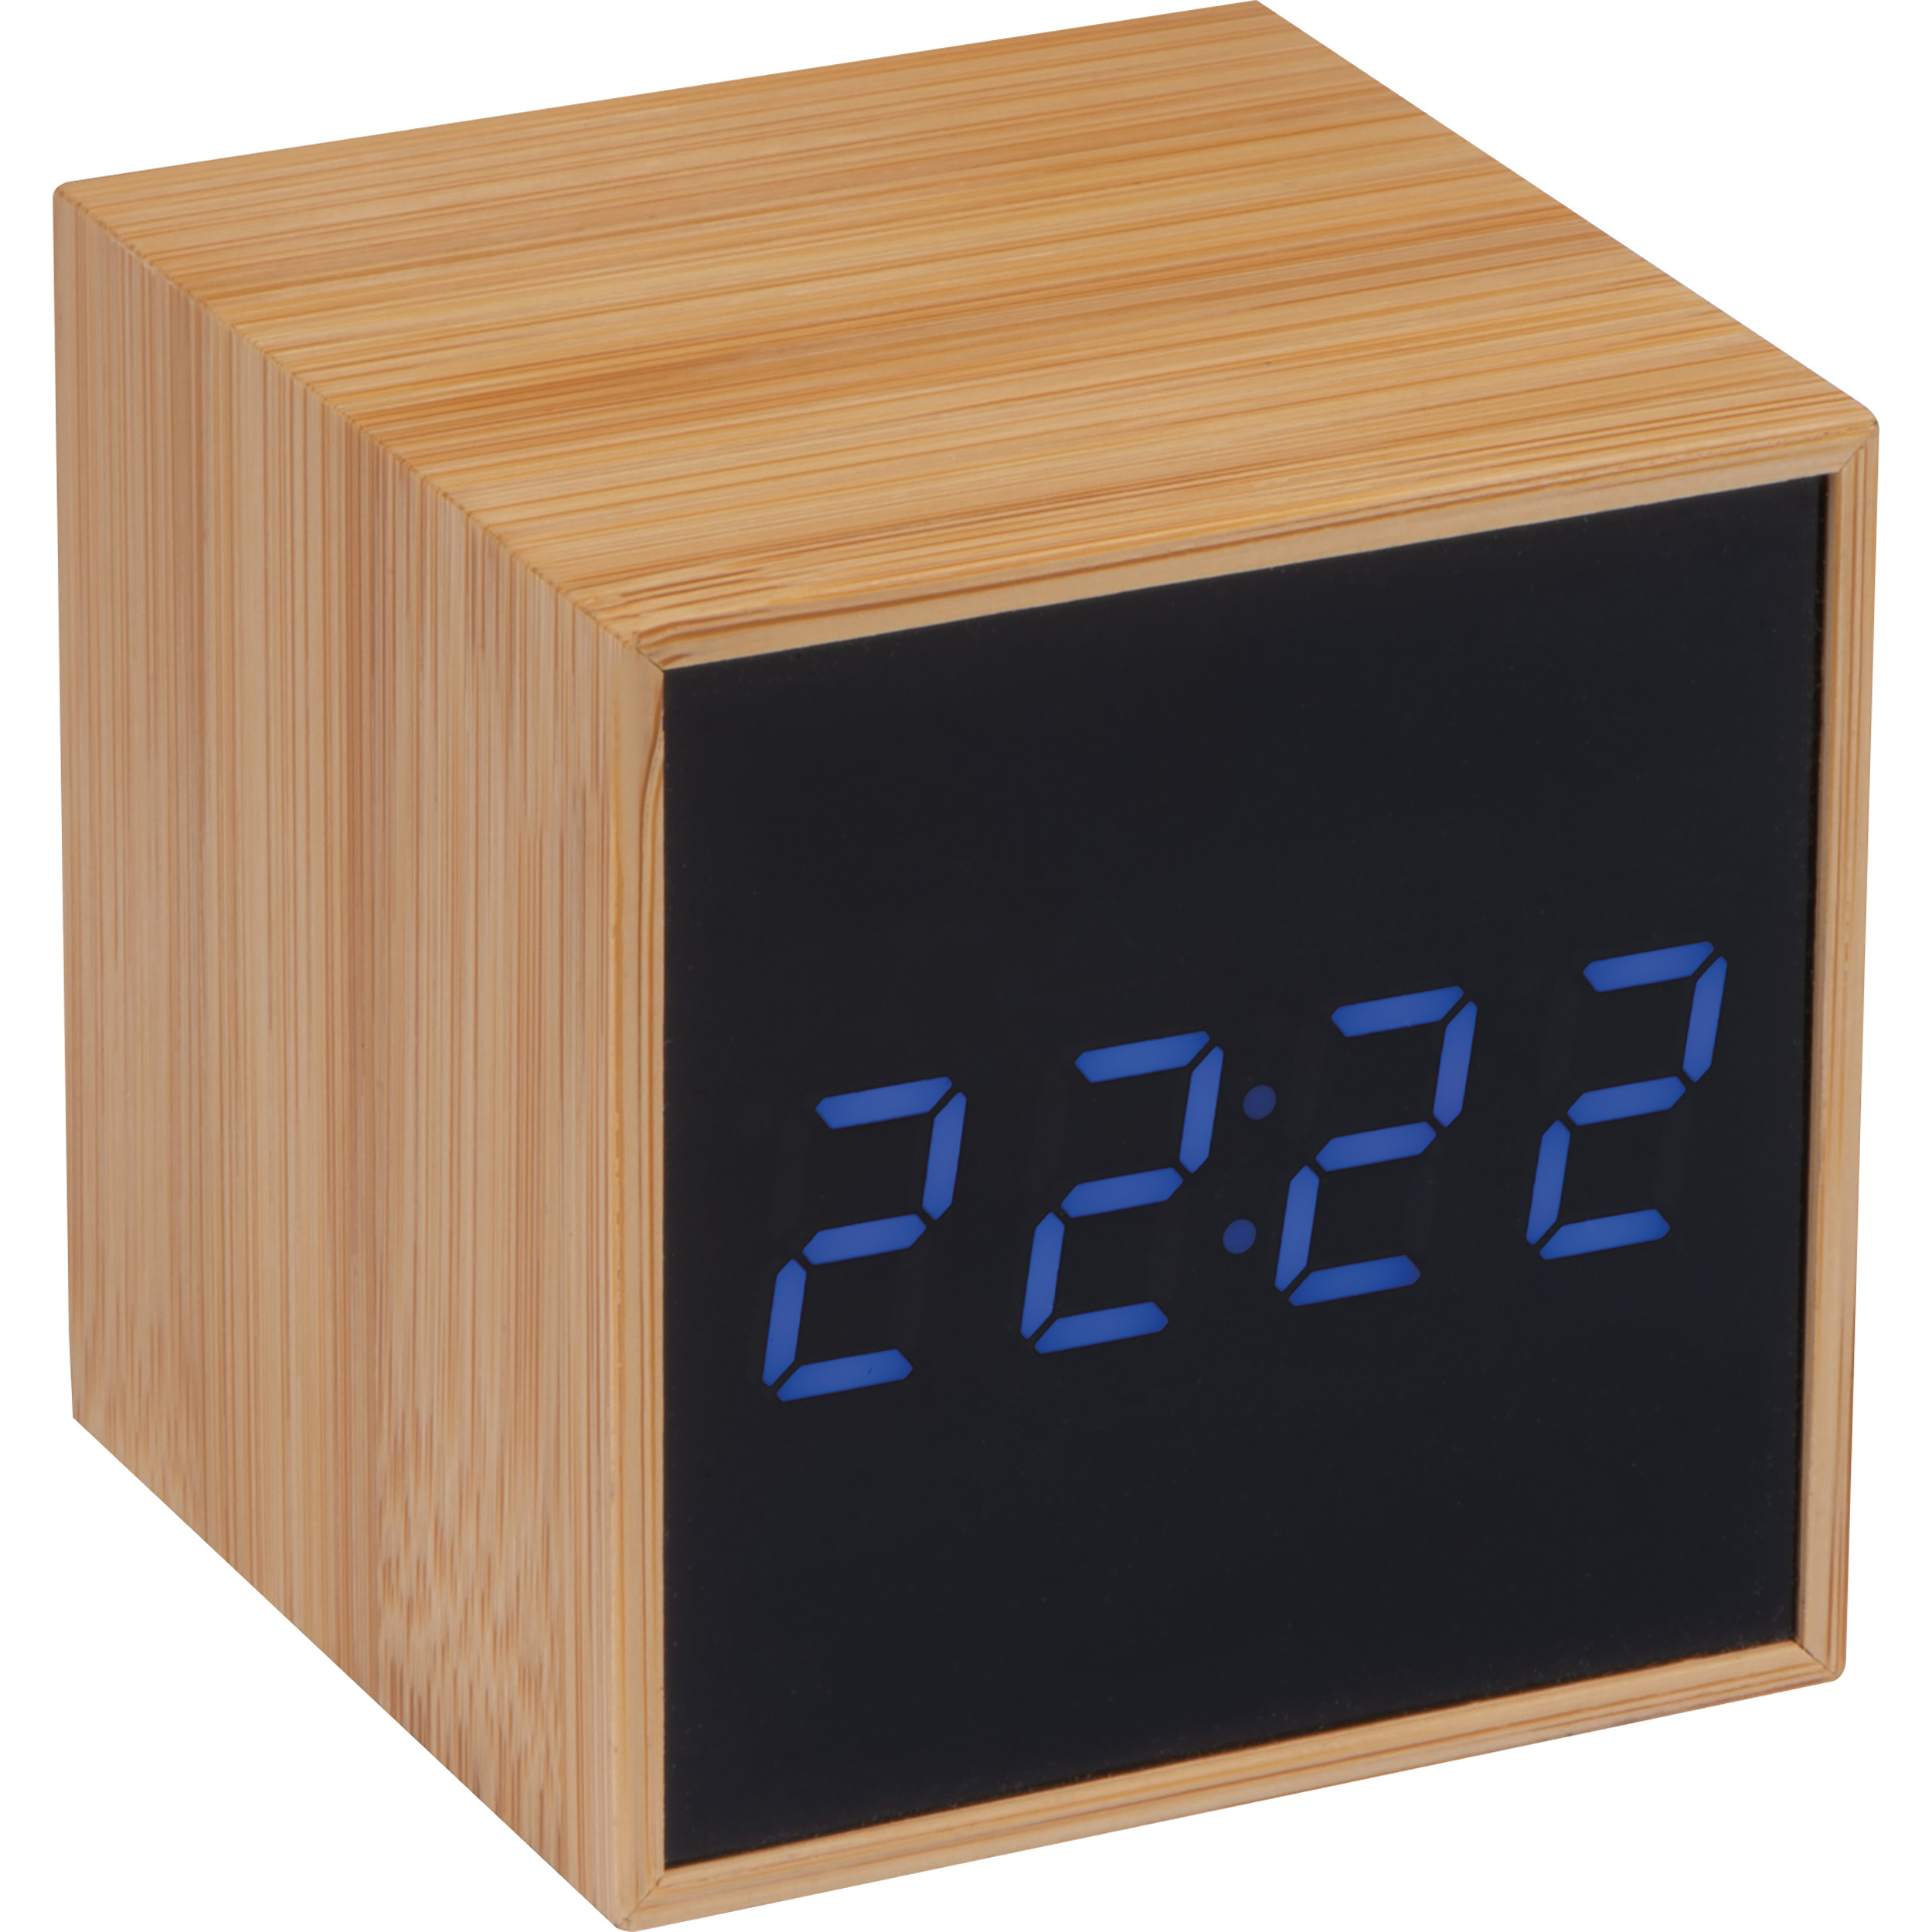 Desk clock with black display and blue LED display